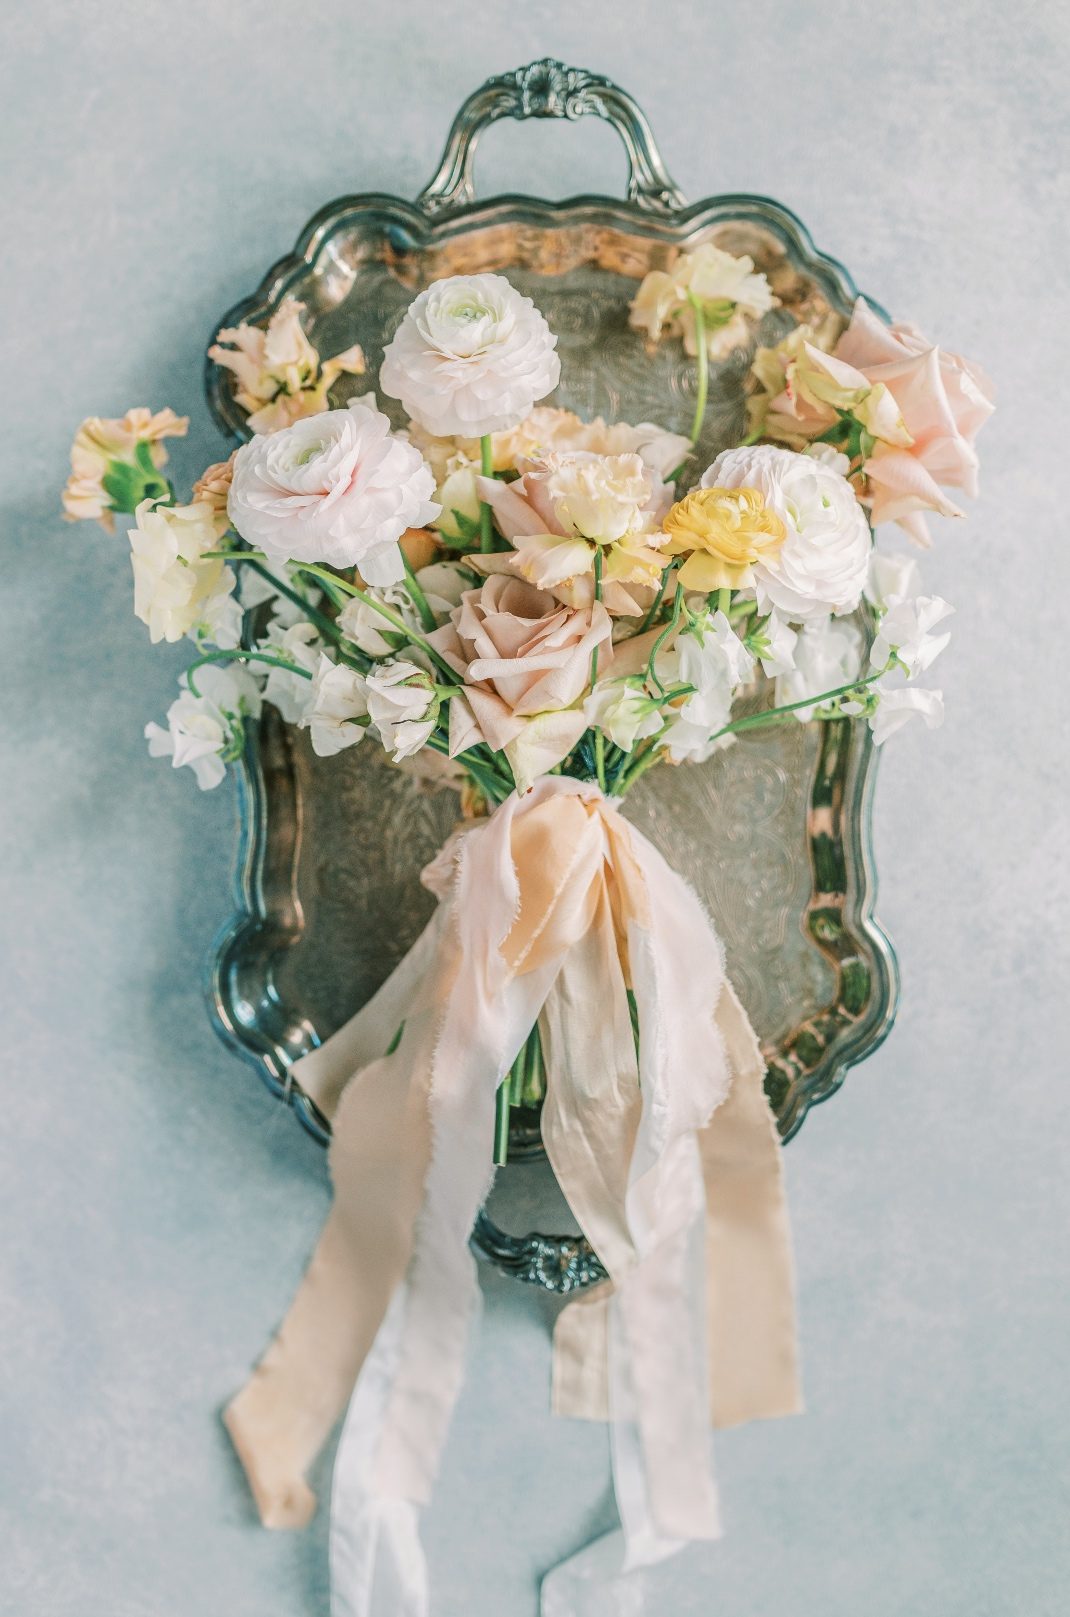 A flat lay shot of a beautiful Calyx Floral Design bouquet in an ornate silver tray